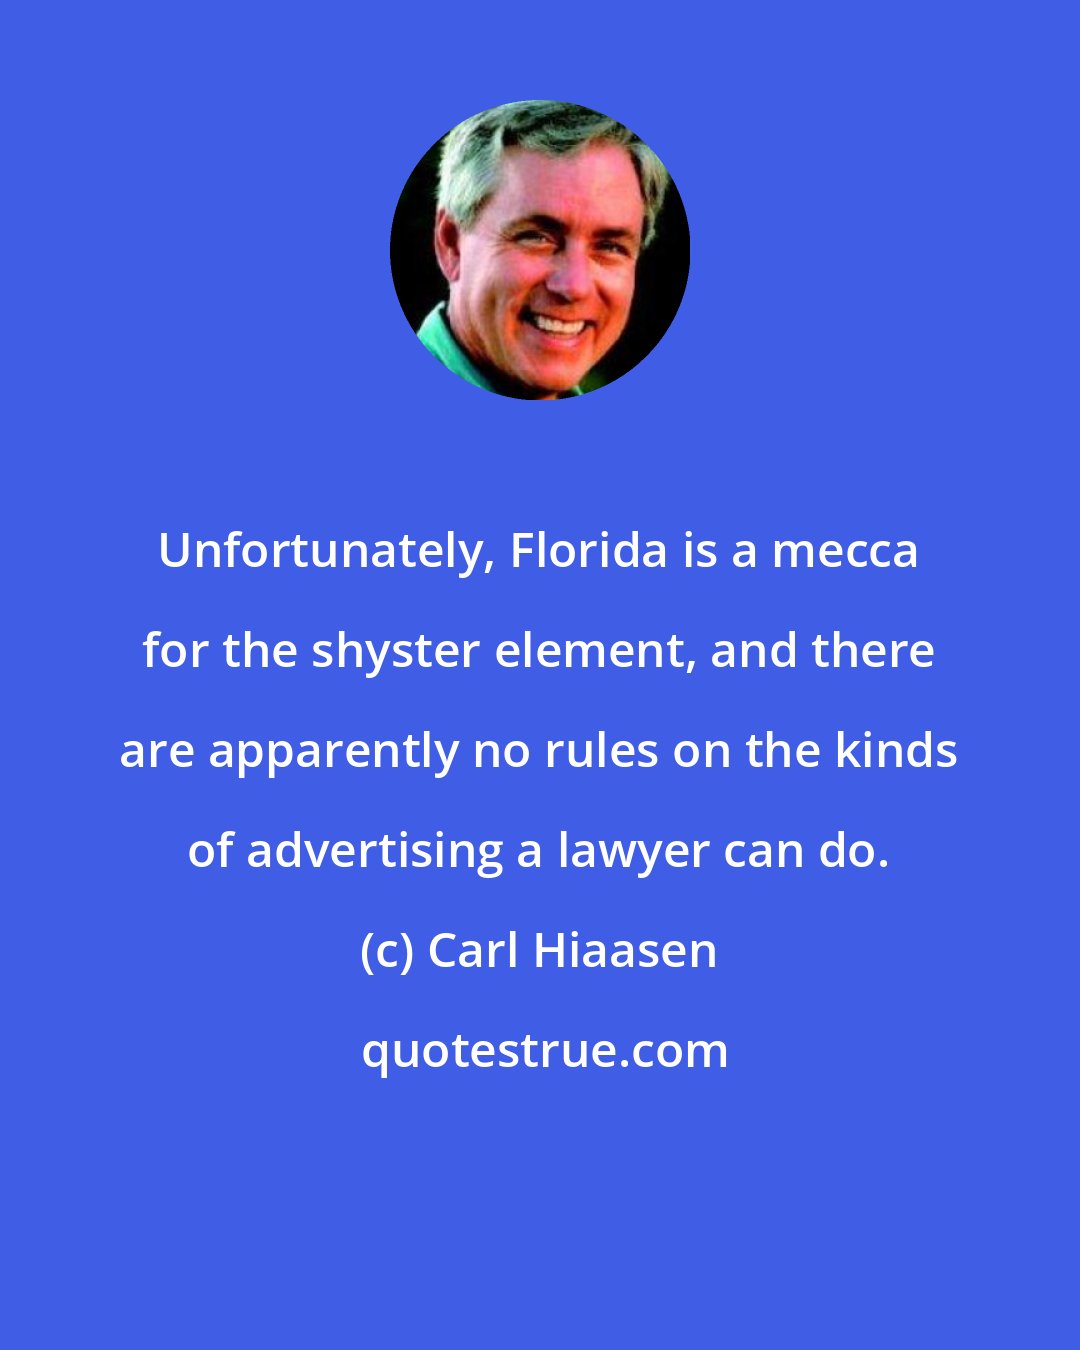 Carl Hiaasen: Unfortunately, Florida is a mecca for the shyster element, and there are apparently no rules on the kinds of advertising a lawyer can do.